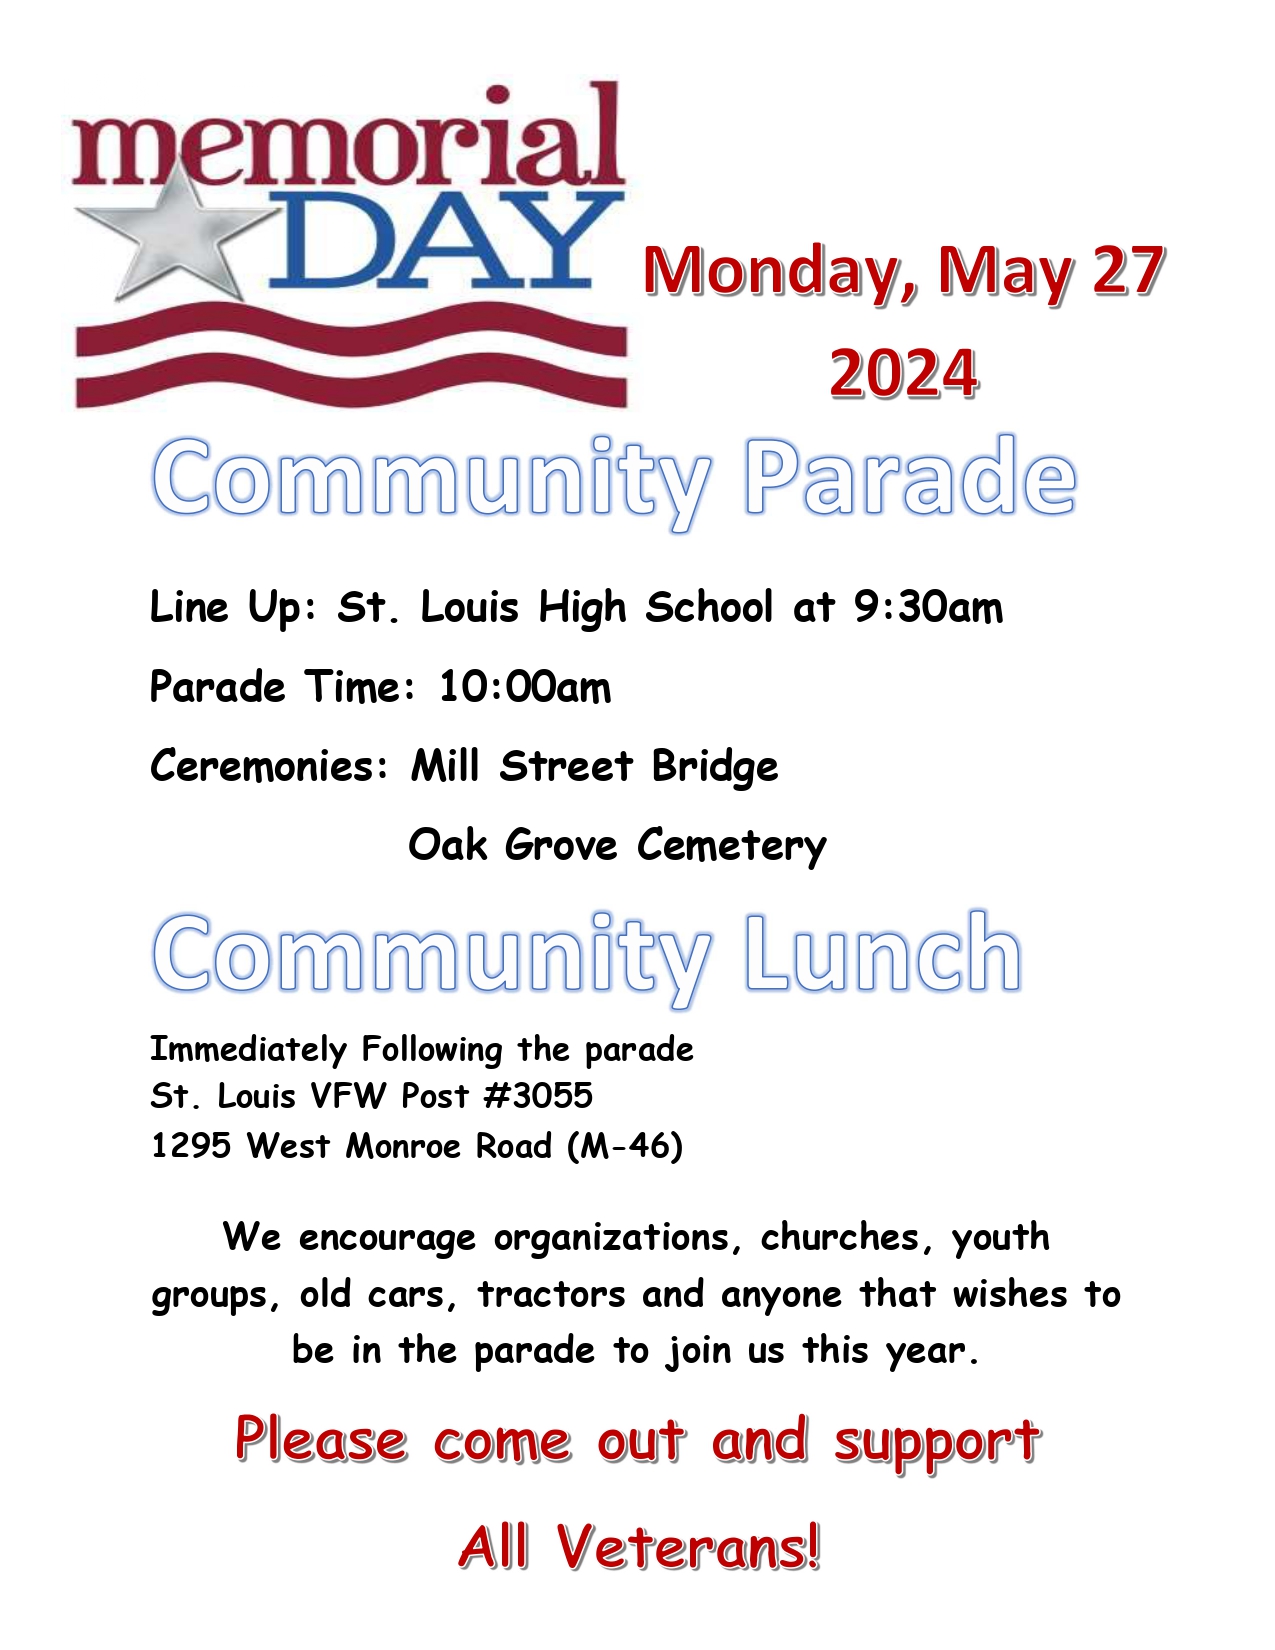 Memorial Day, Monday, May 27, 2024, Community Parade. Line up: St. Louis High School at 9:30 a.m. Parade time: 10:00 a.m. Ceremonies: Mill Street Bridge & Oak Grove Cemetery Community Lunch immediately following the parade at St. Louis VFW Post #3055, 1295 West Monroe Road (M-46). We encourage organizations, churches, youth groups, old cars, tractors and anyone that wishes to be in the parade to join us this year. Please come out and support all veterans!